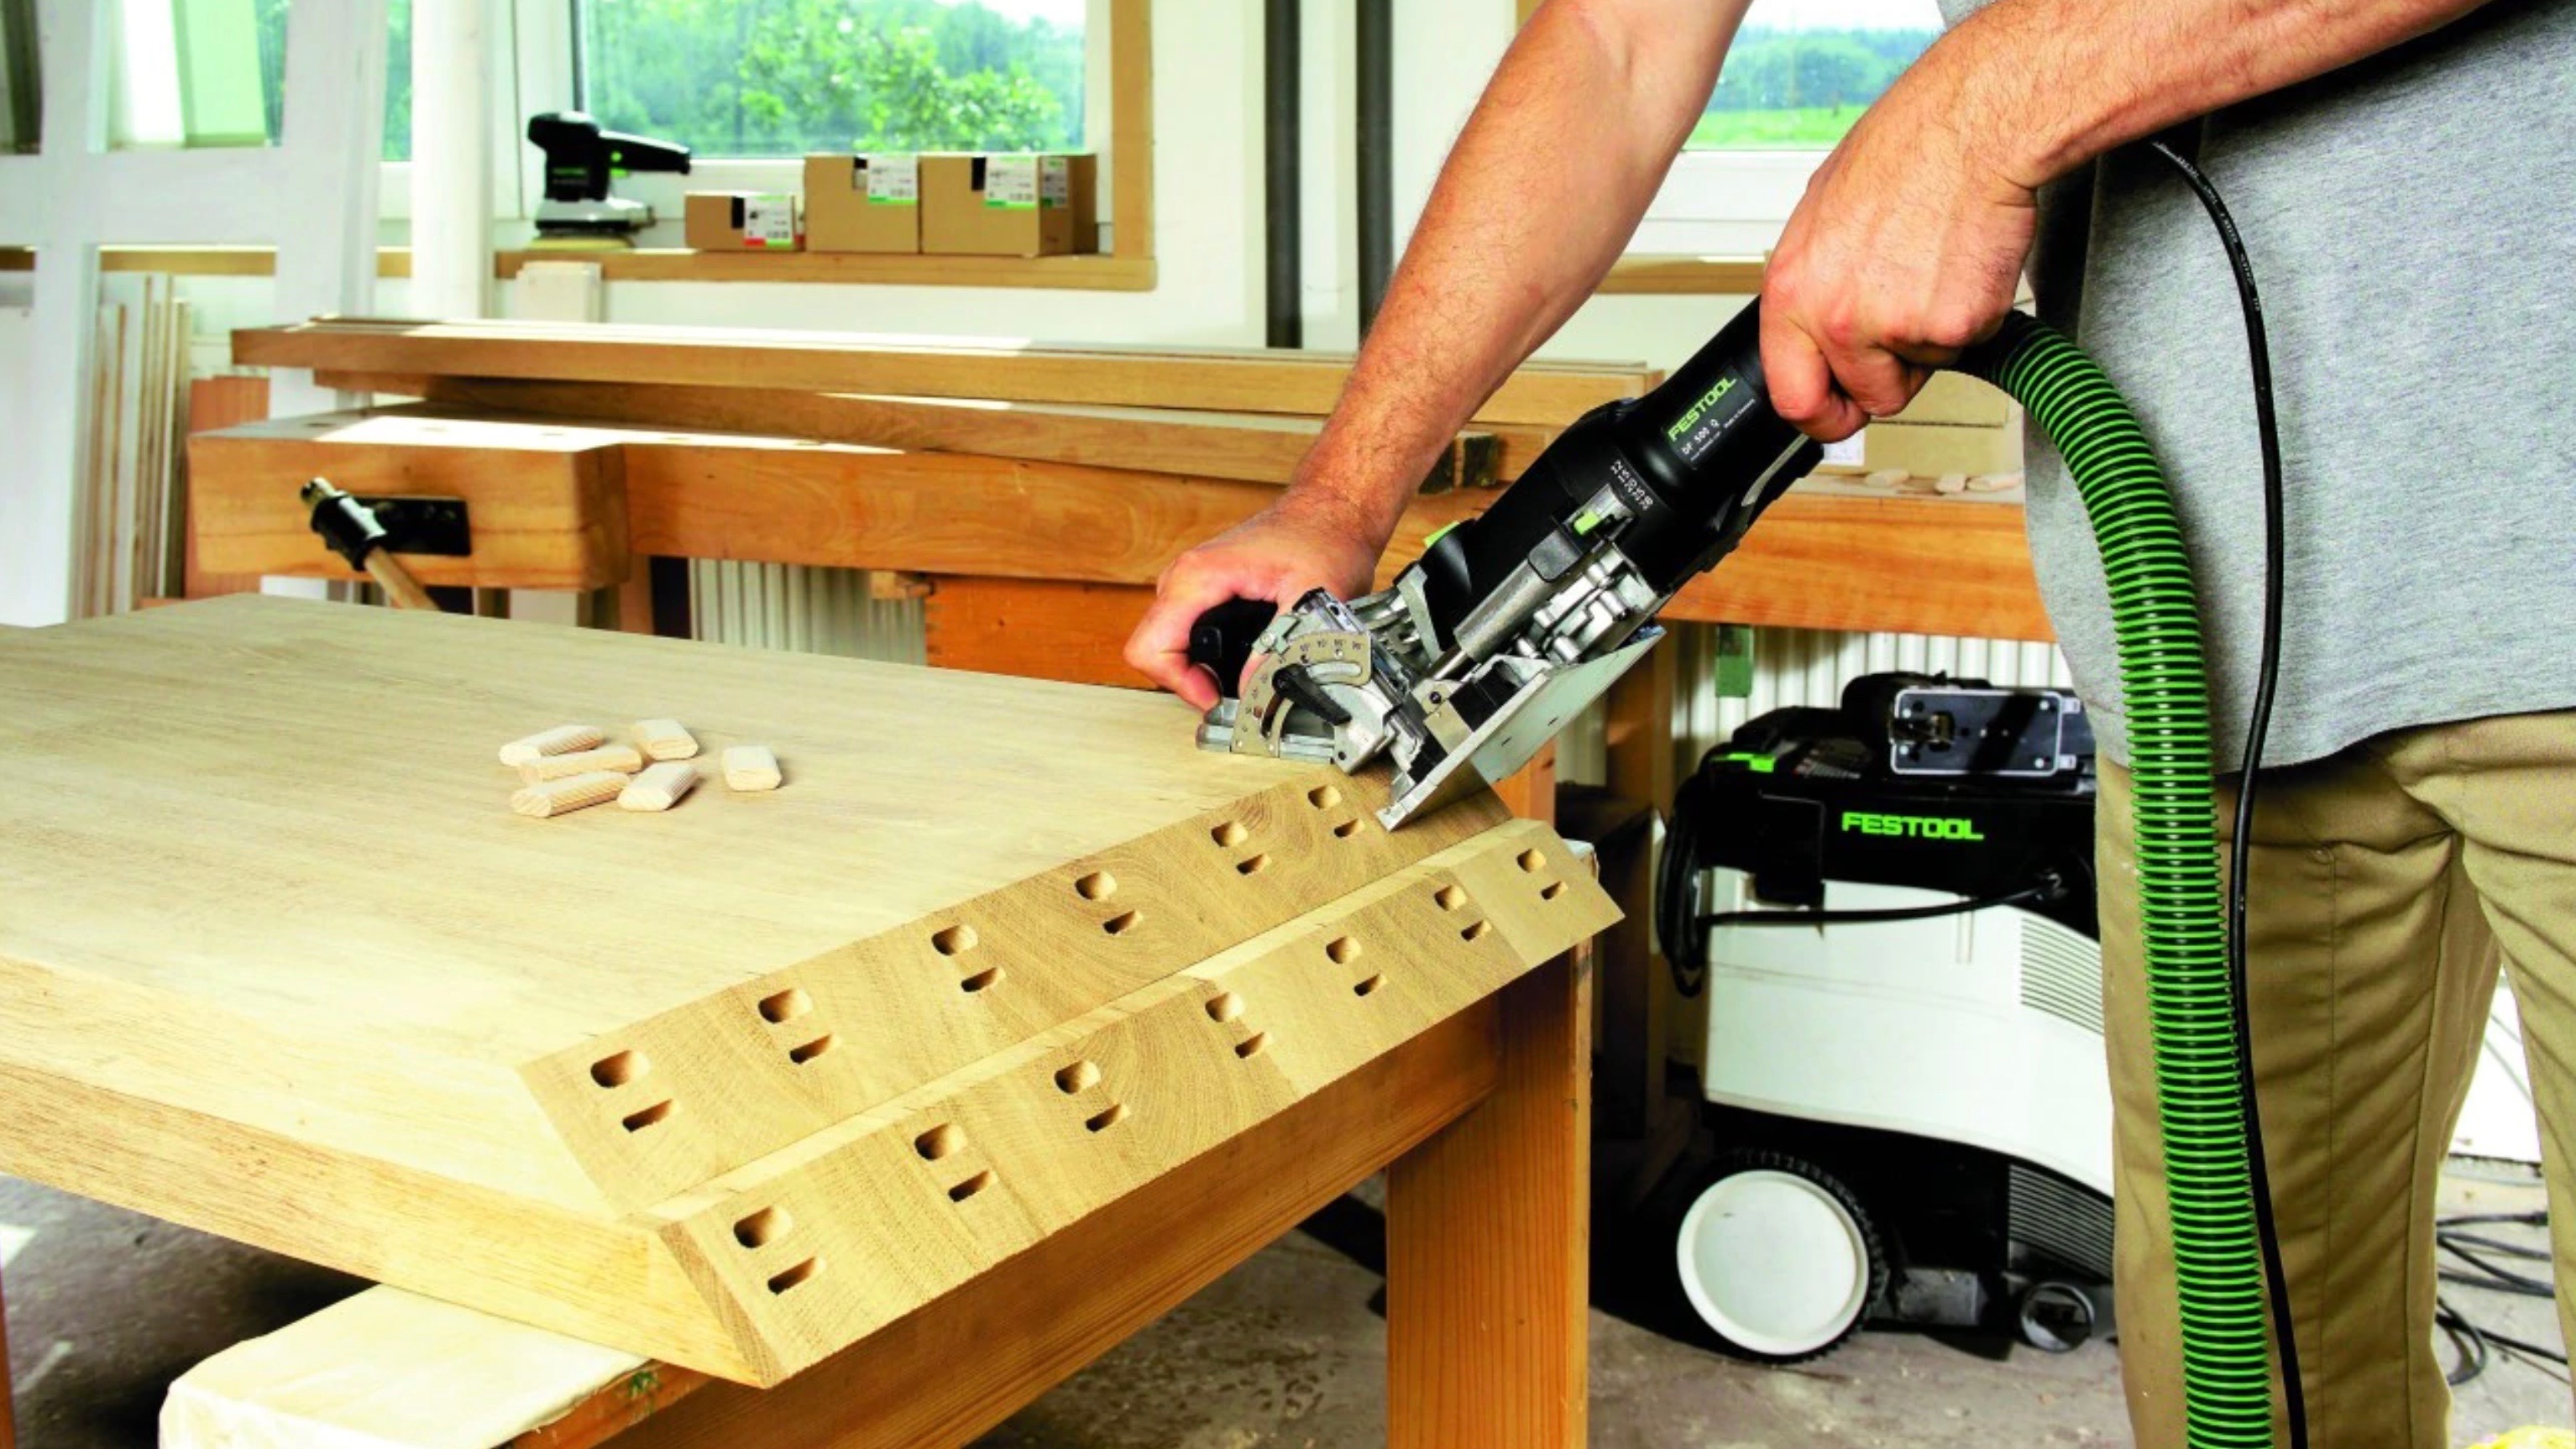 Tips, Tricks, and Cool Joinery Projects for the Festool Domino DF 500